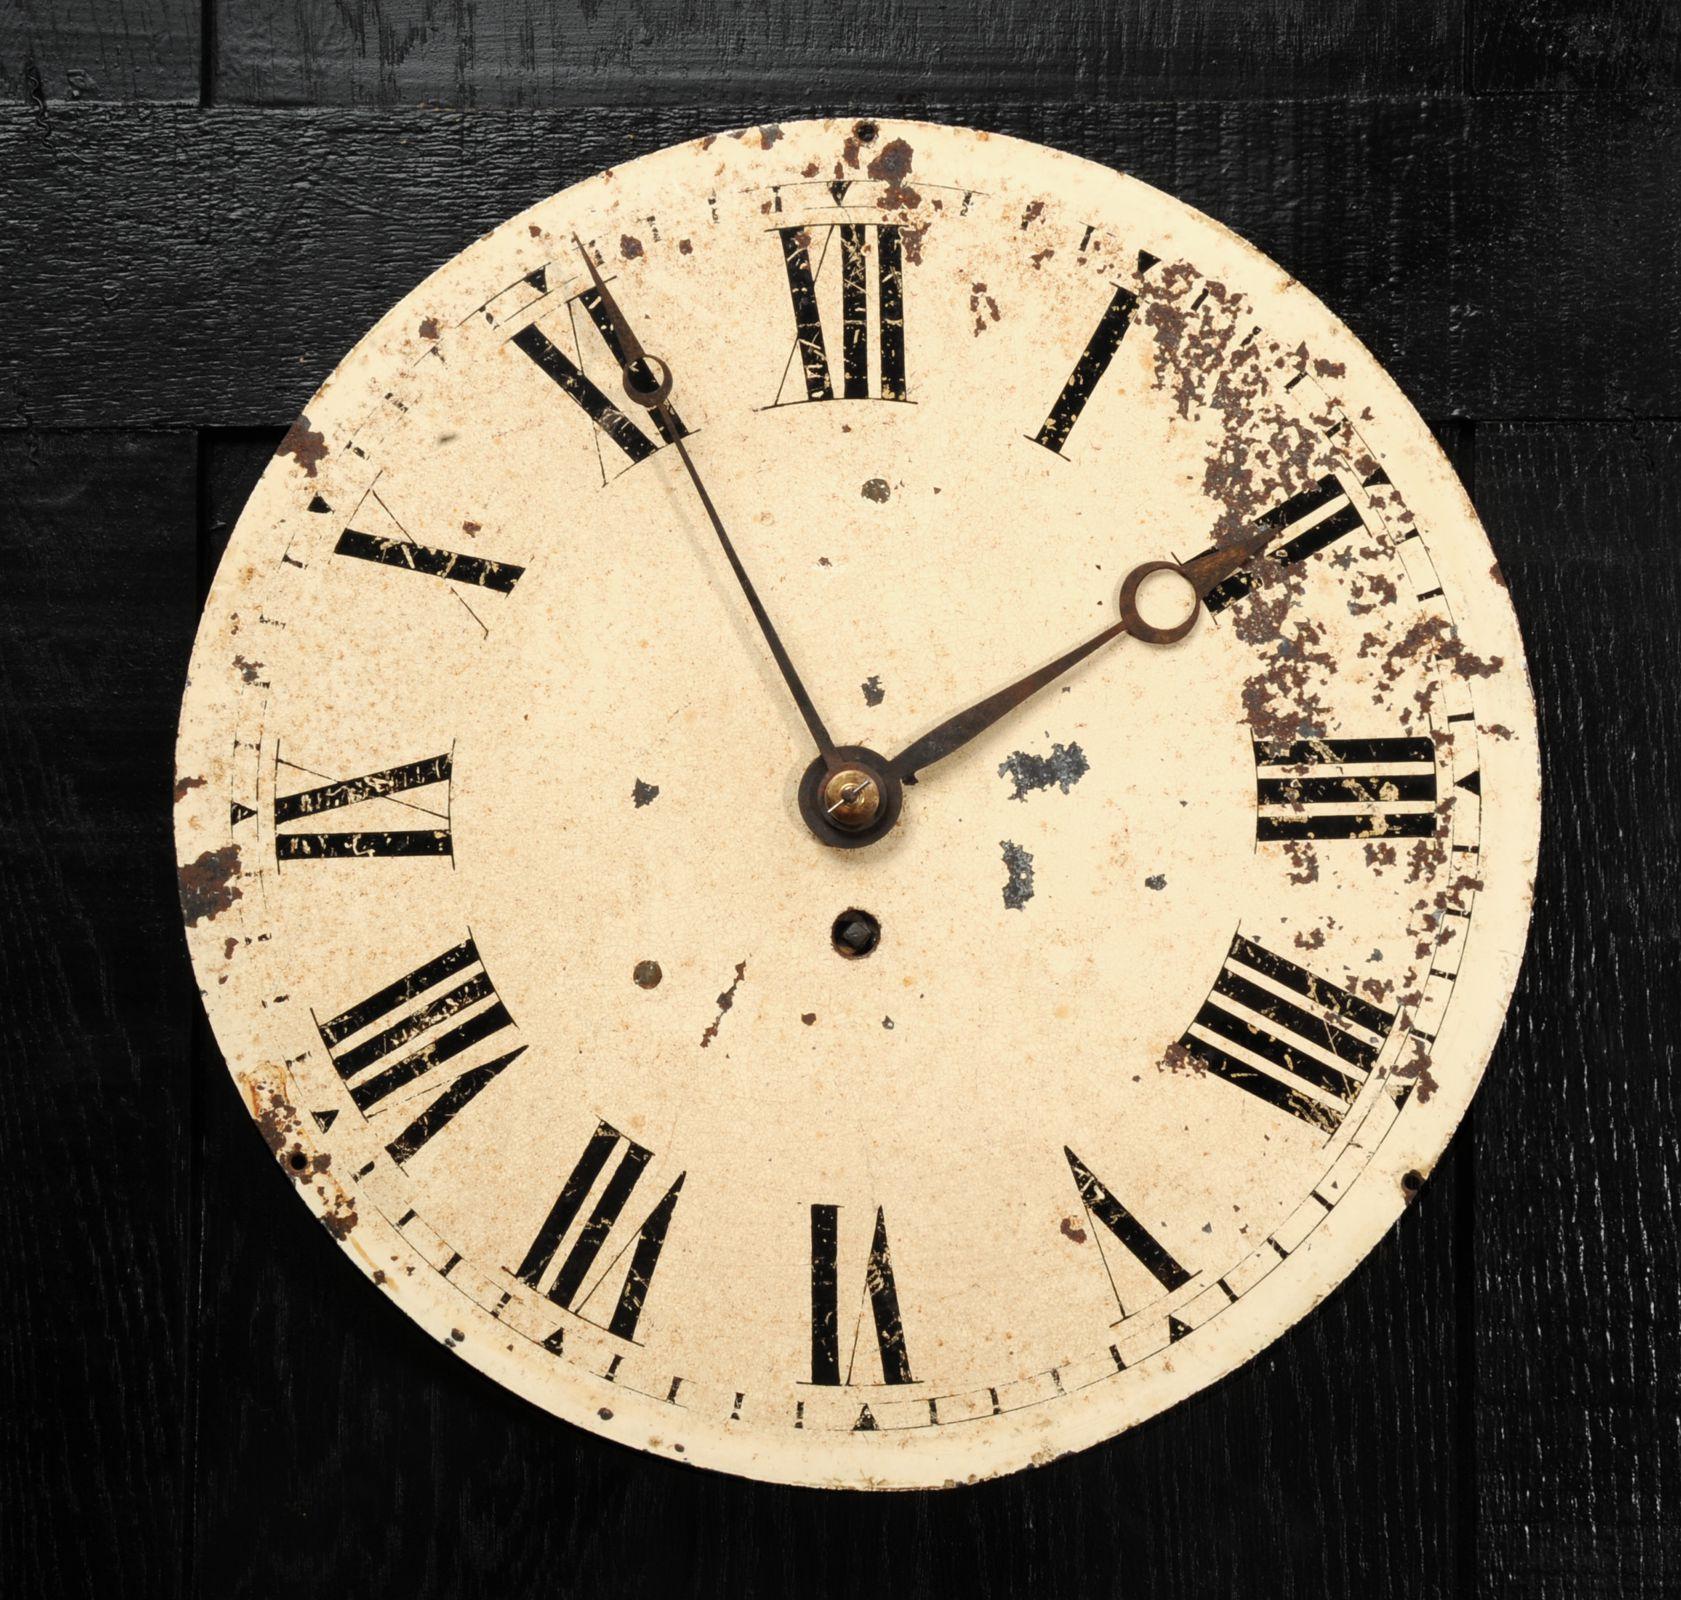 A lovely antique English iron clock dial dating from circa 1880. Reclaimed from a derelict Victorian works, it bears the scars of a hard life. Beautifully patinated with an ancient craquelure, paint loss and rust. The fine, once blued steel hands